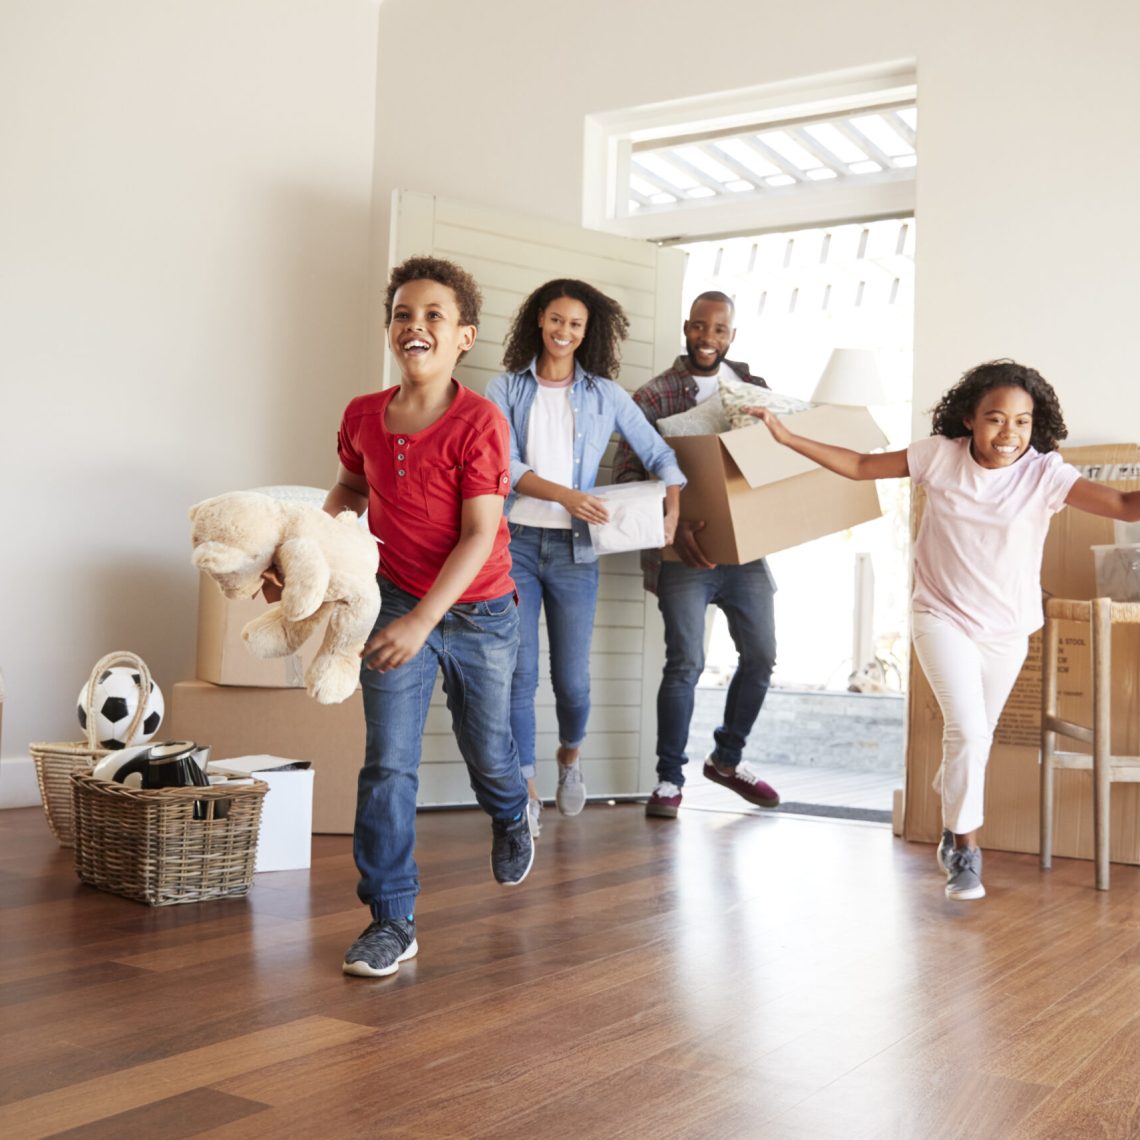 Excited Family Carrying Boxes Into New Home On Moving Day